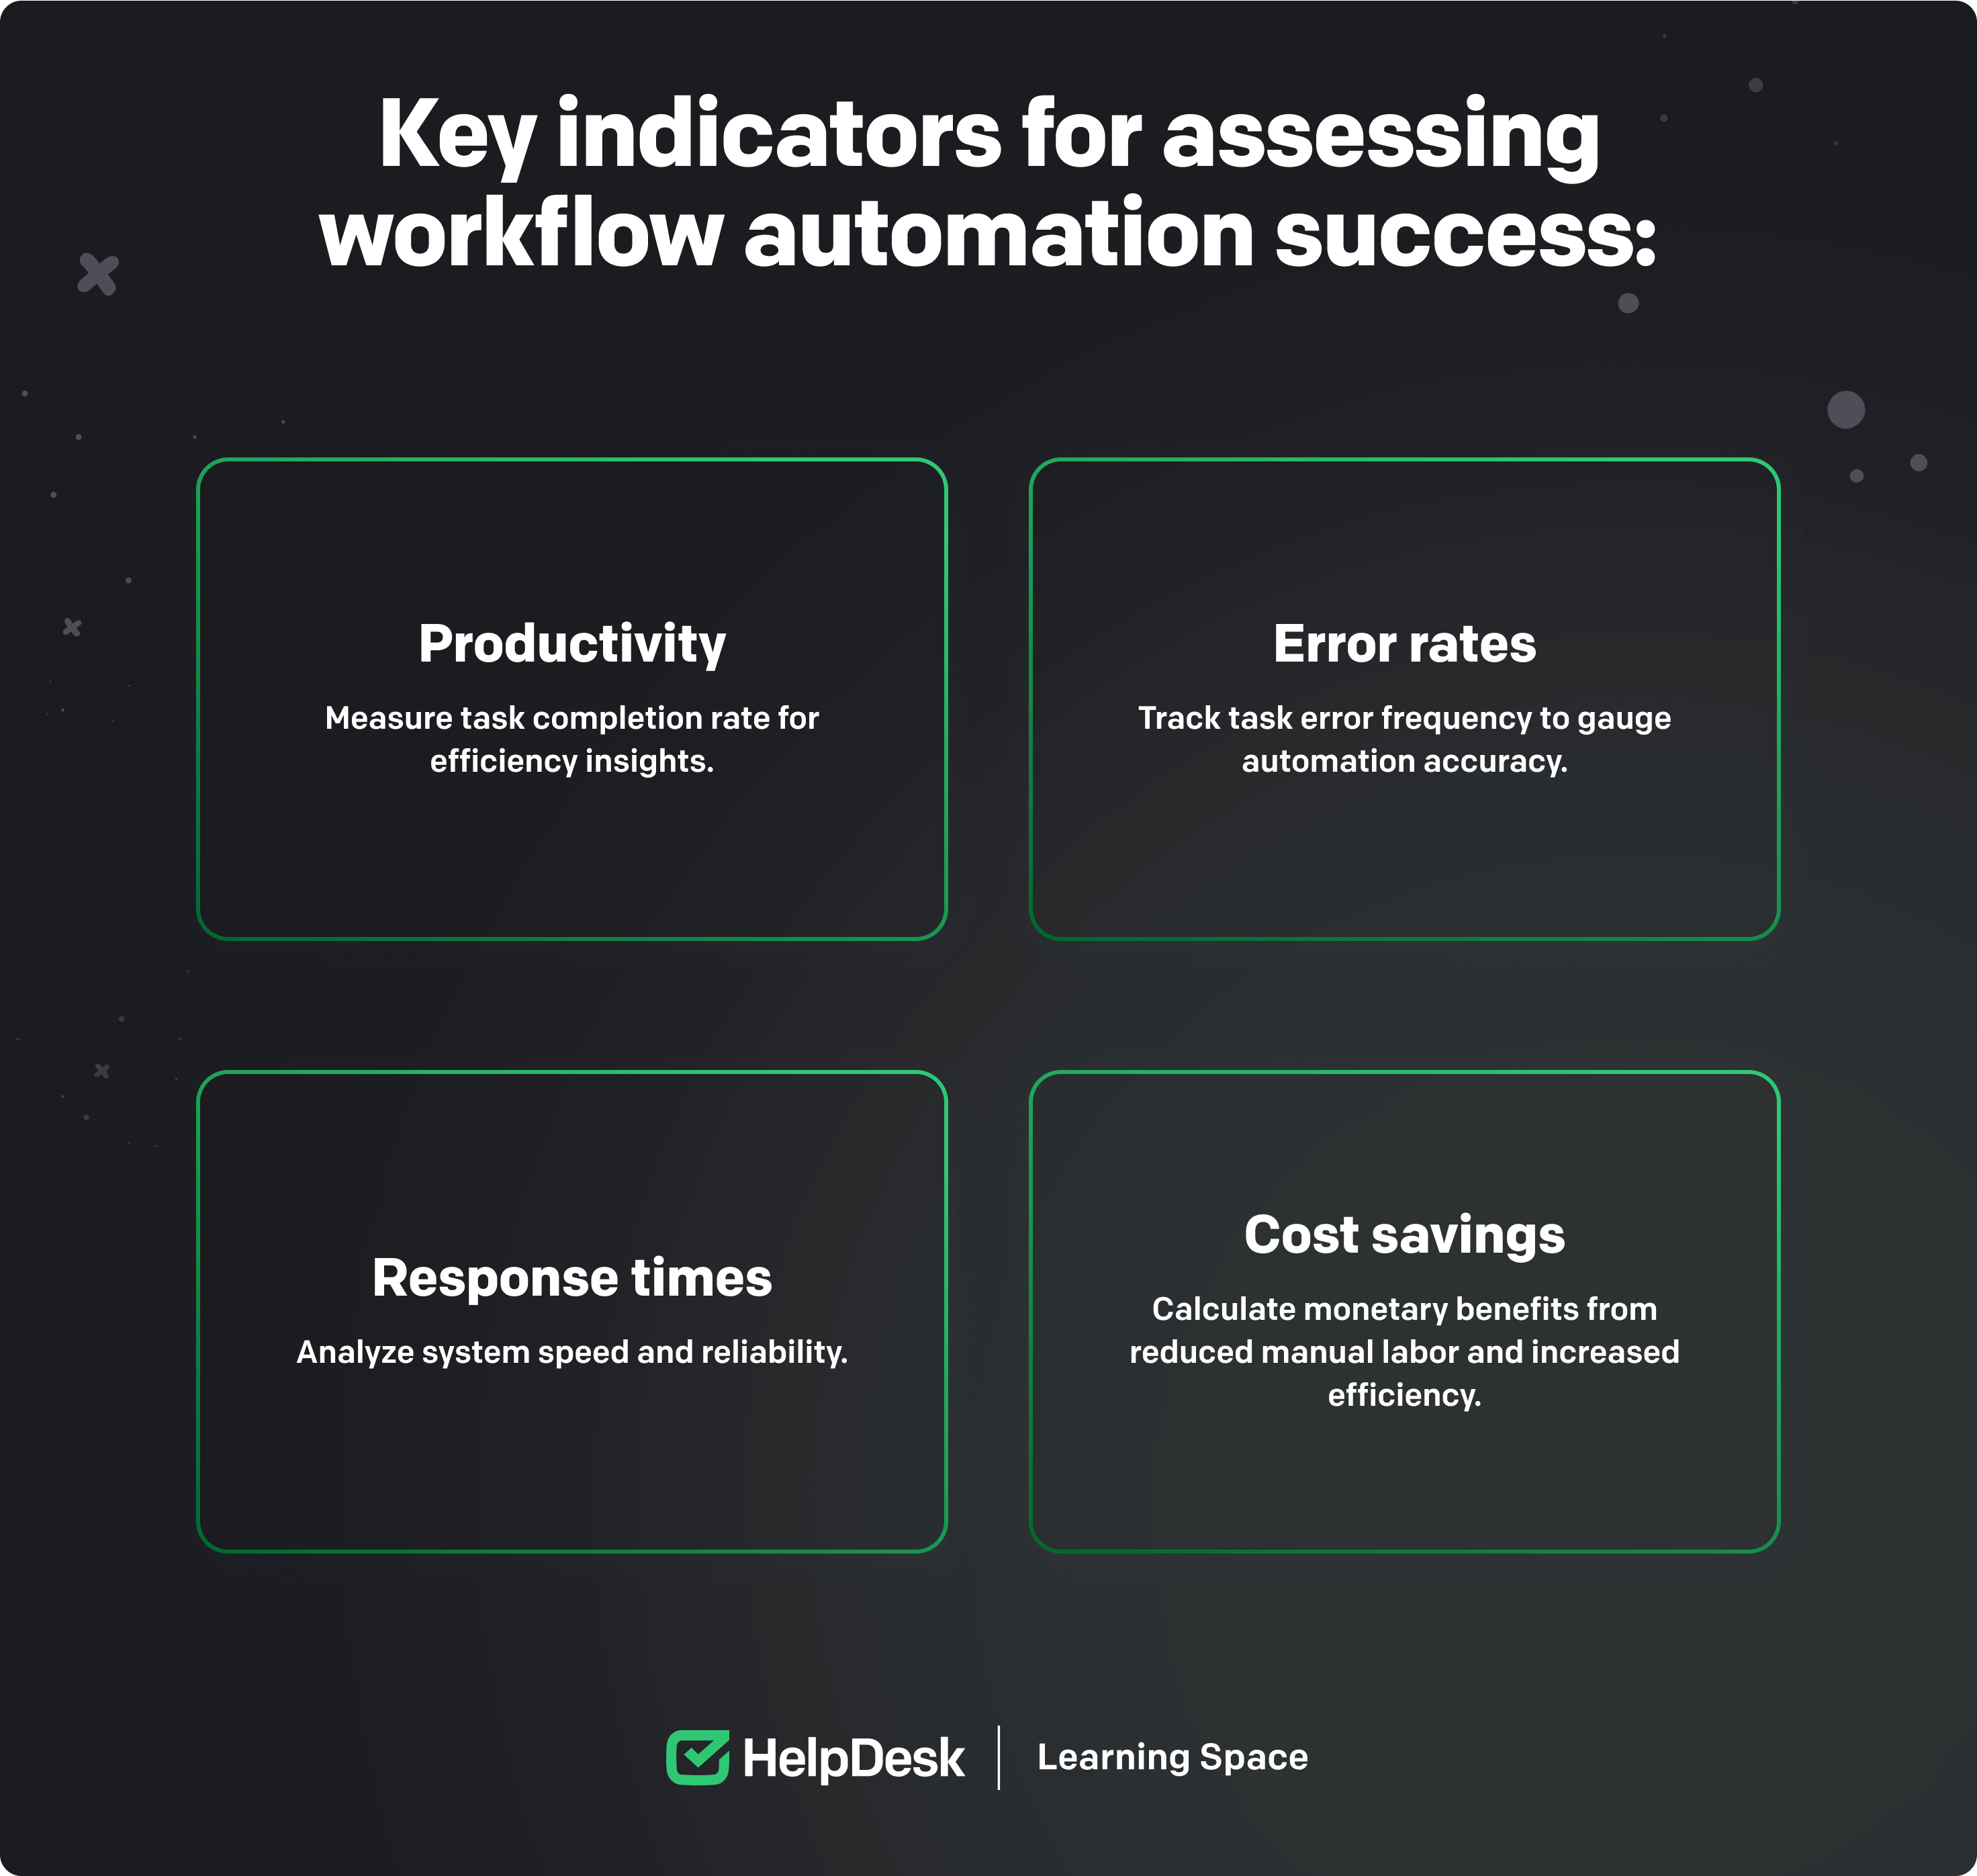 Key indicators for assessing workflow automation success: productivity, error rates, response times, and cost savings